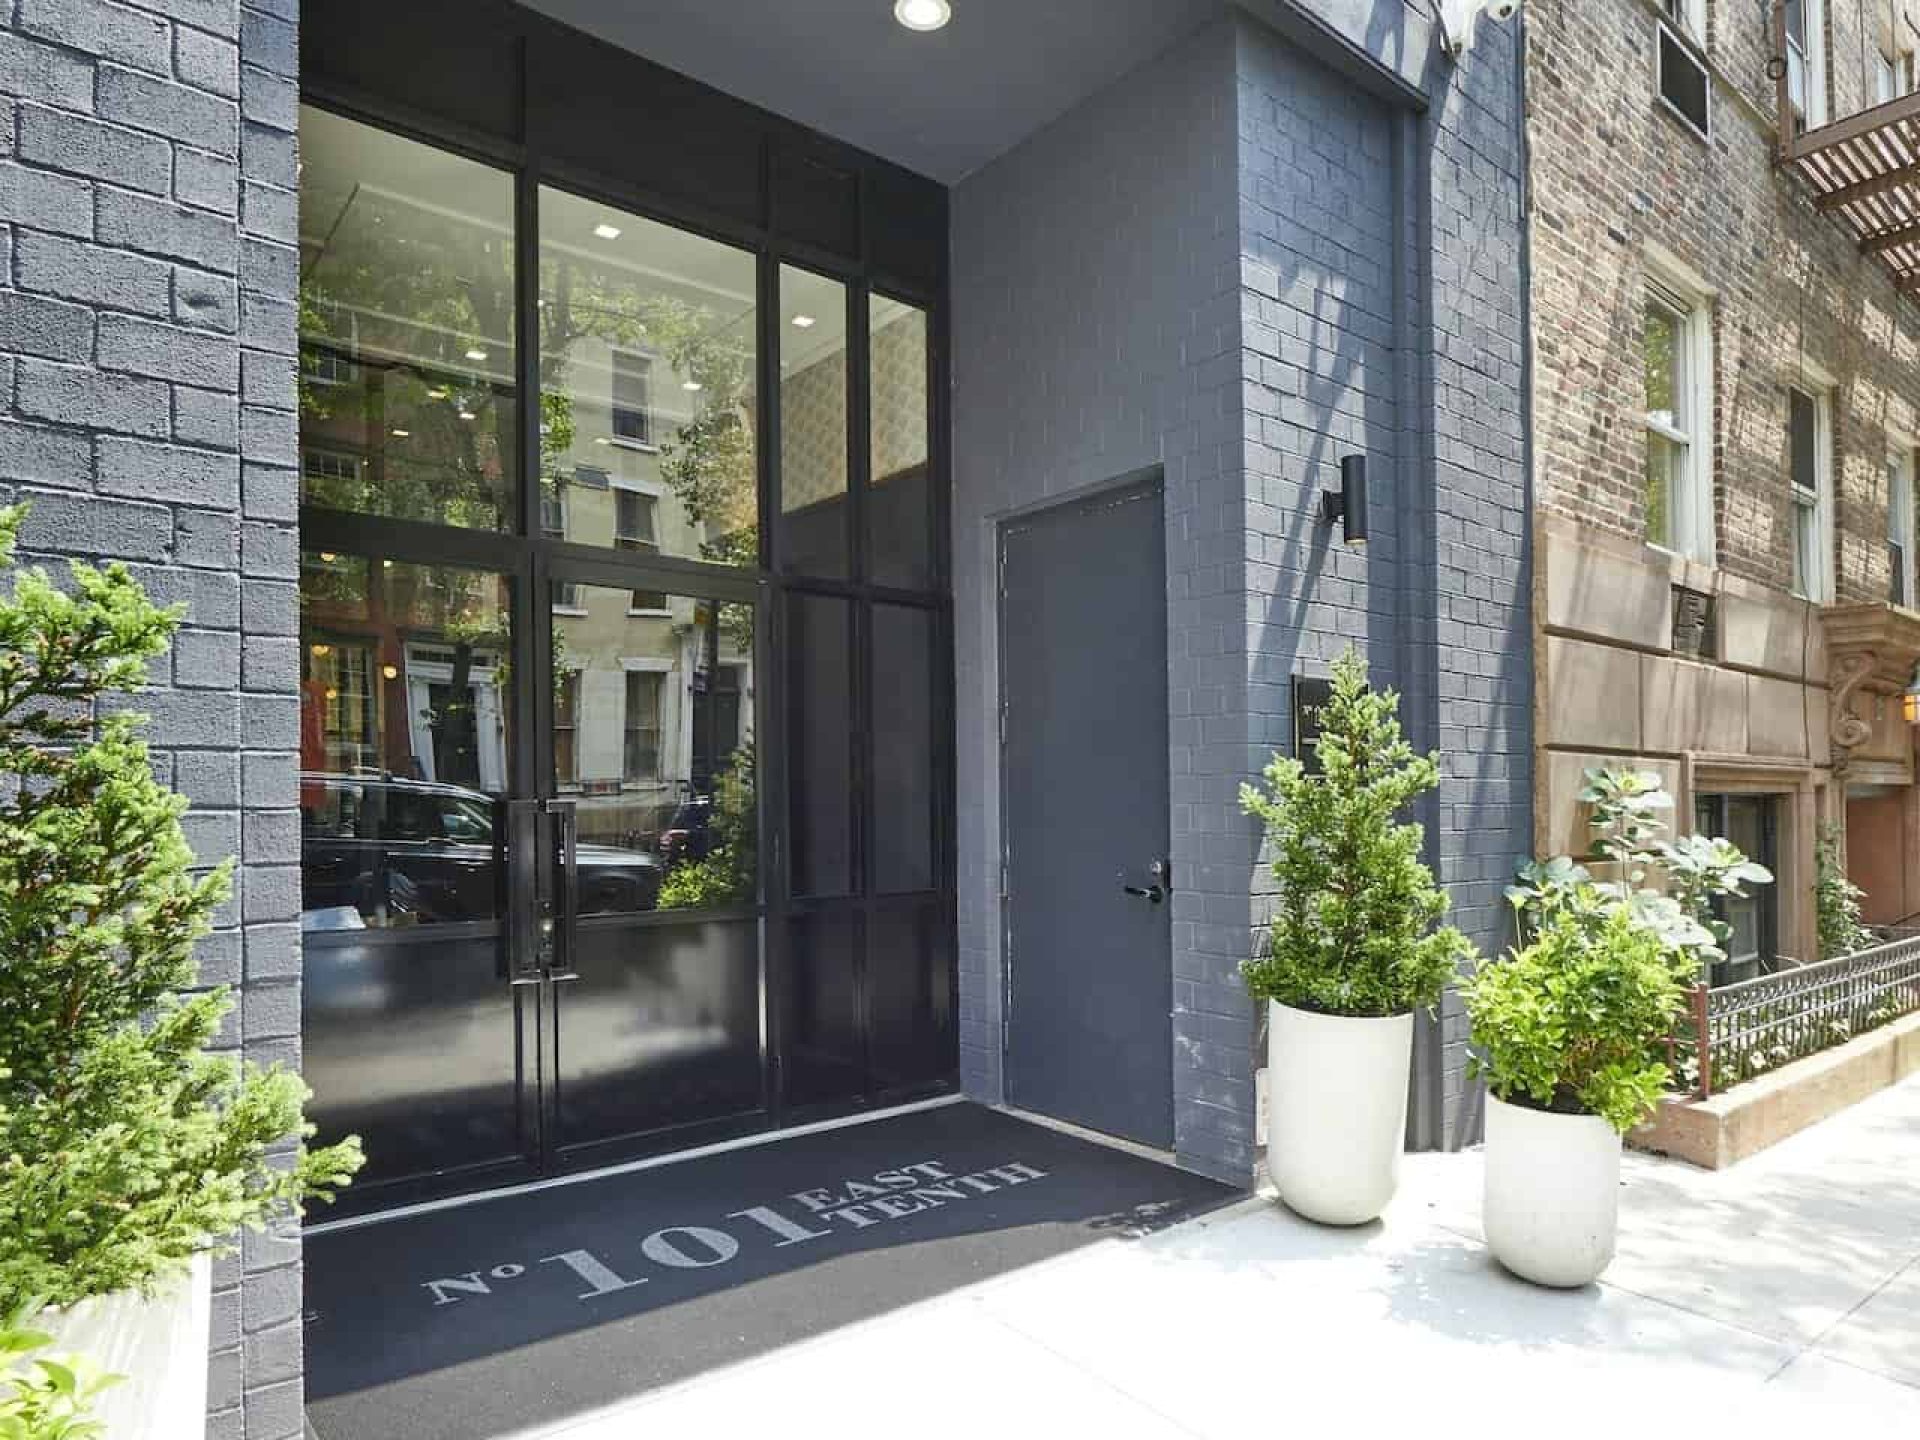 Entrance to 101 East 10th Street luxury apartments. Tall glass double doors under stone overhang with potted plants.